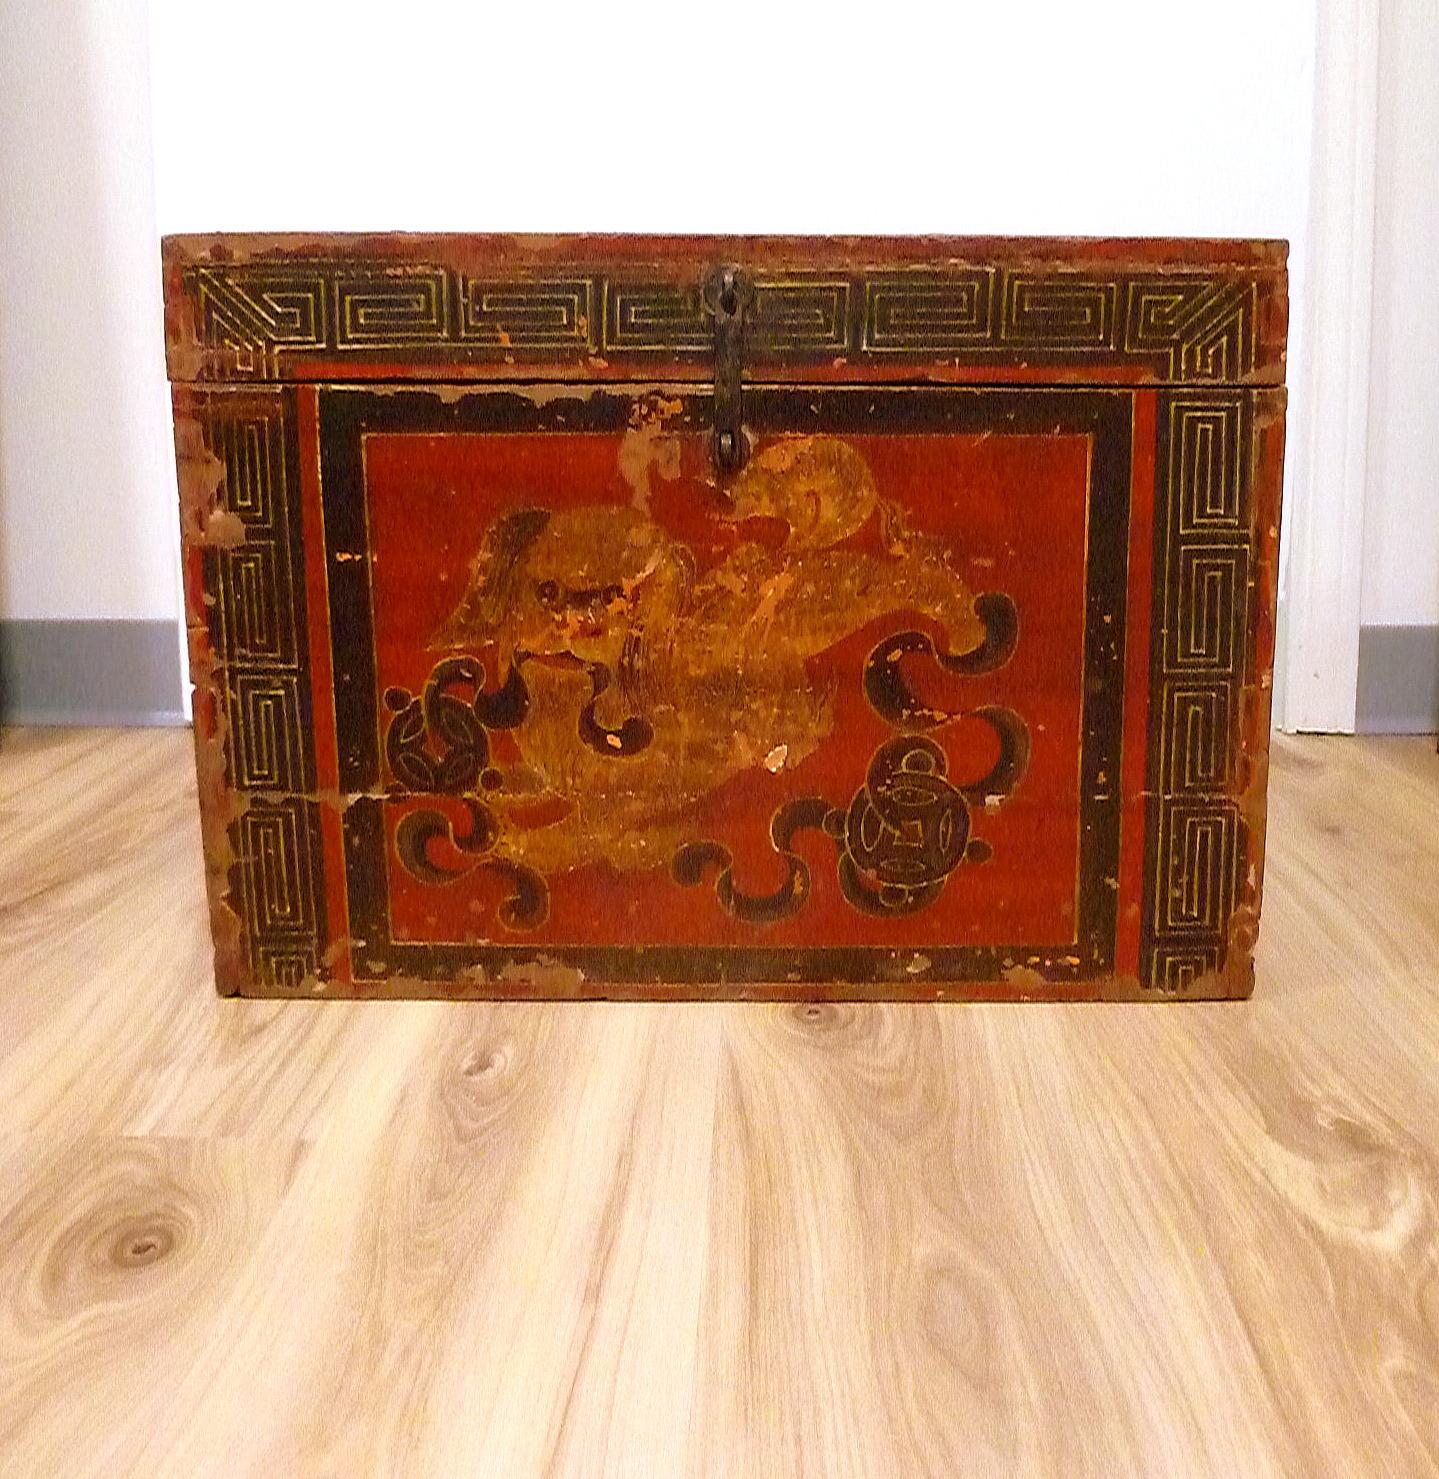 Large size of Tibetan Box with painted foo lion playing and chasing ball.
Original painted motif